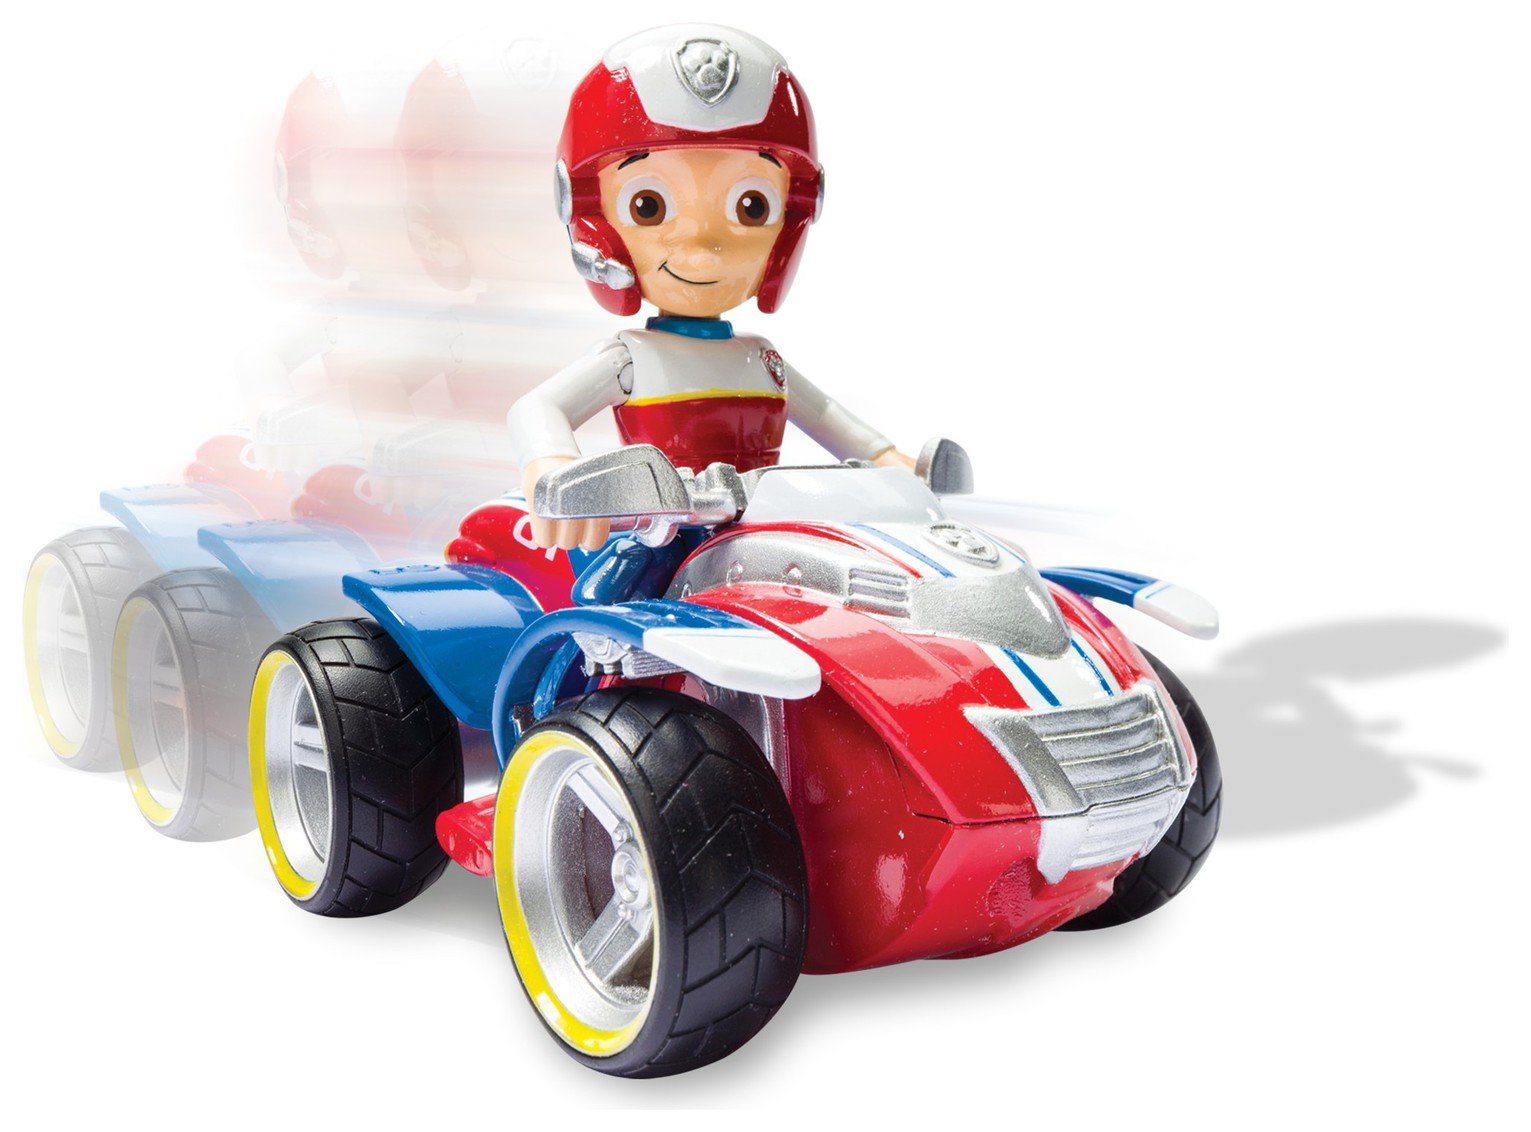 paw patrol ryder and vehicle